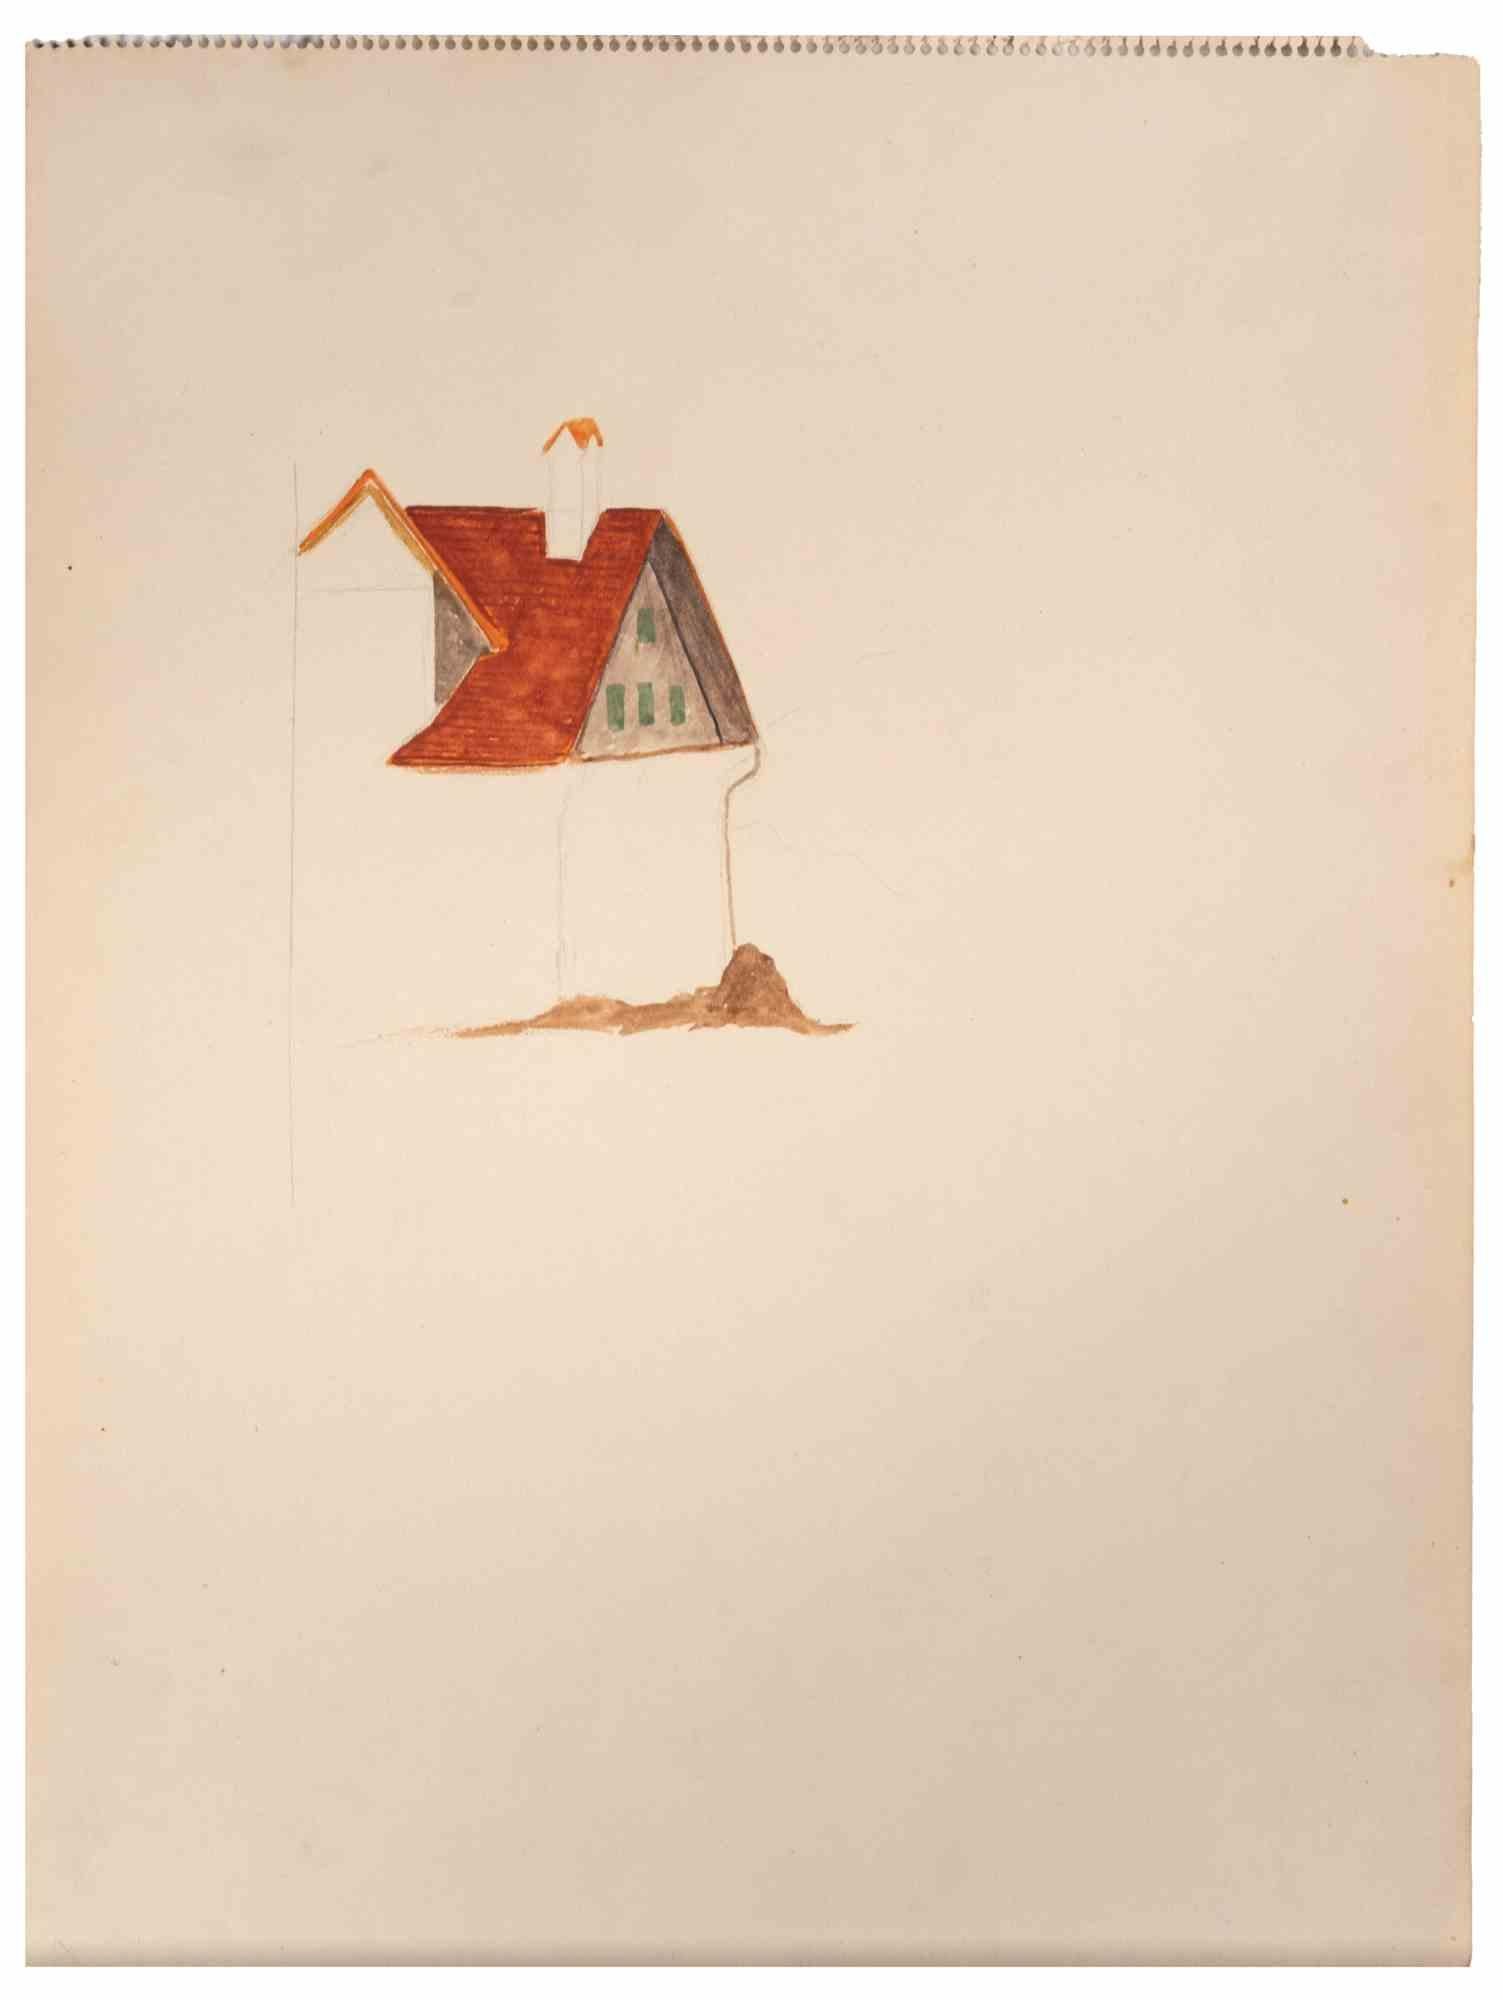 House is a drawing realized  by Suzanne Tourte in the Mid 20th Century.

Ink and Water Color on paper.

In good conditions.

The artwork is represented through deft strokes masterly.